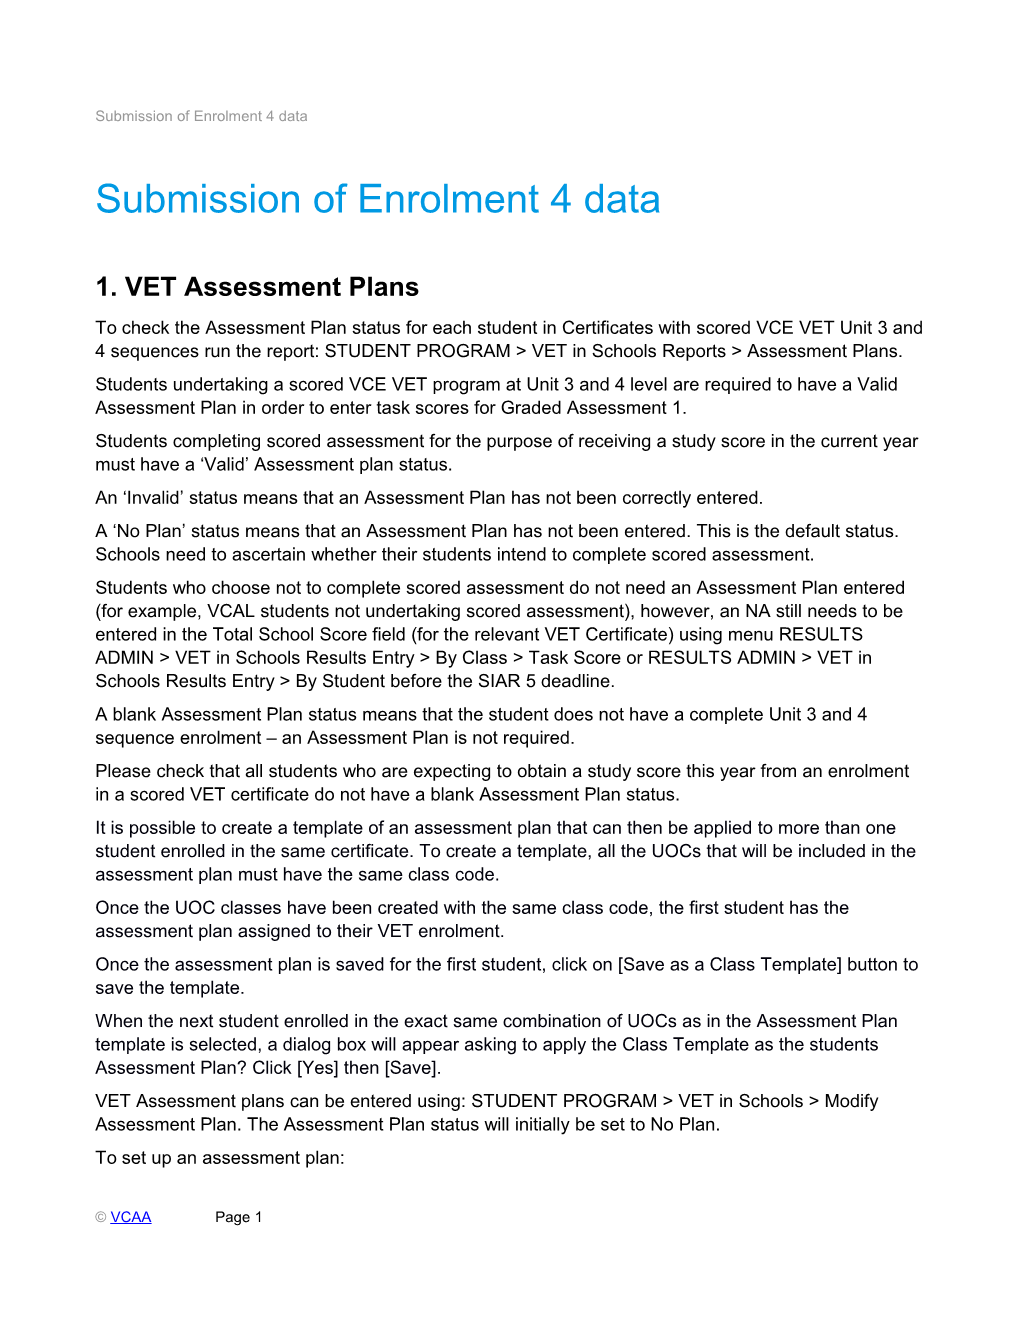 Submission of Enrolment 4 Data